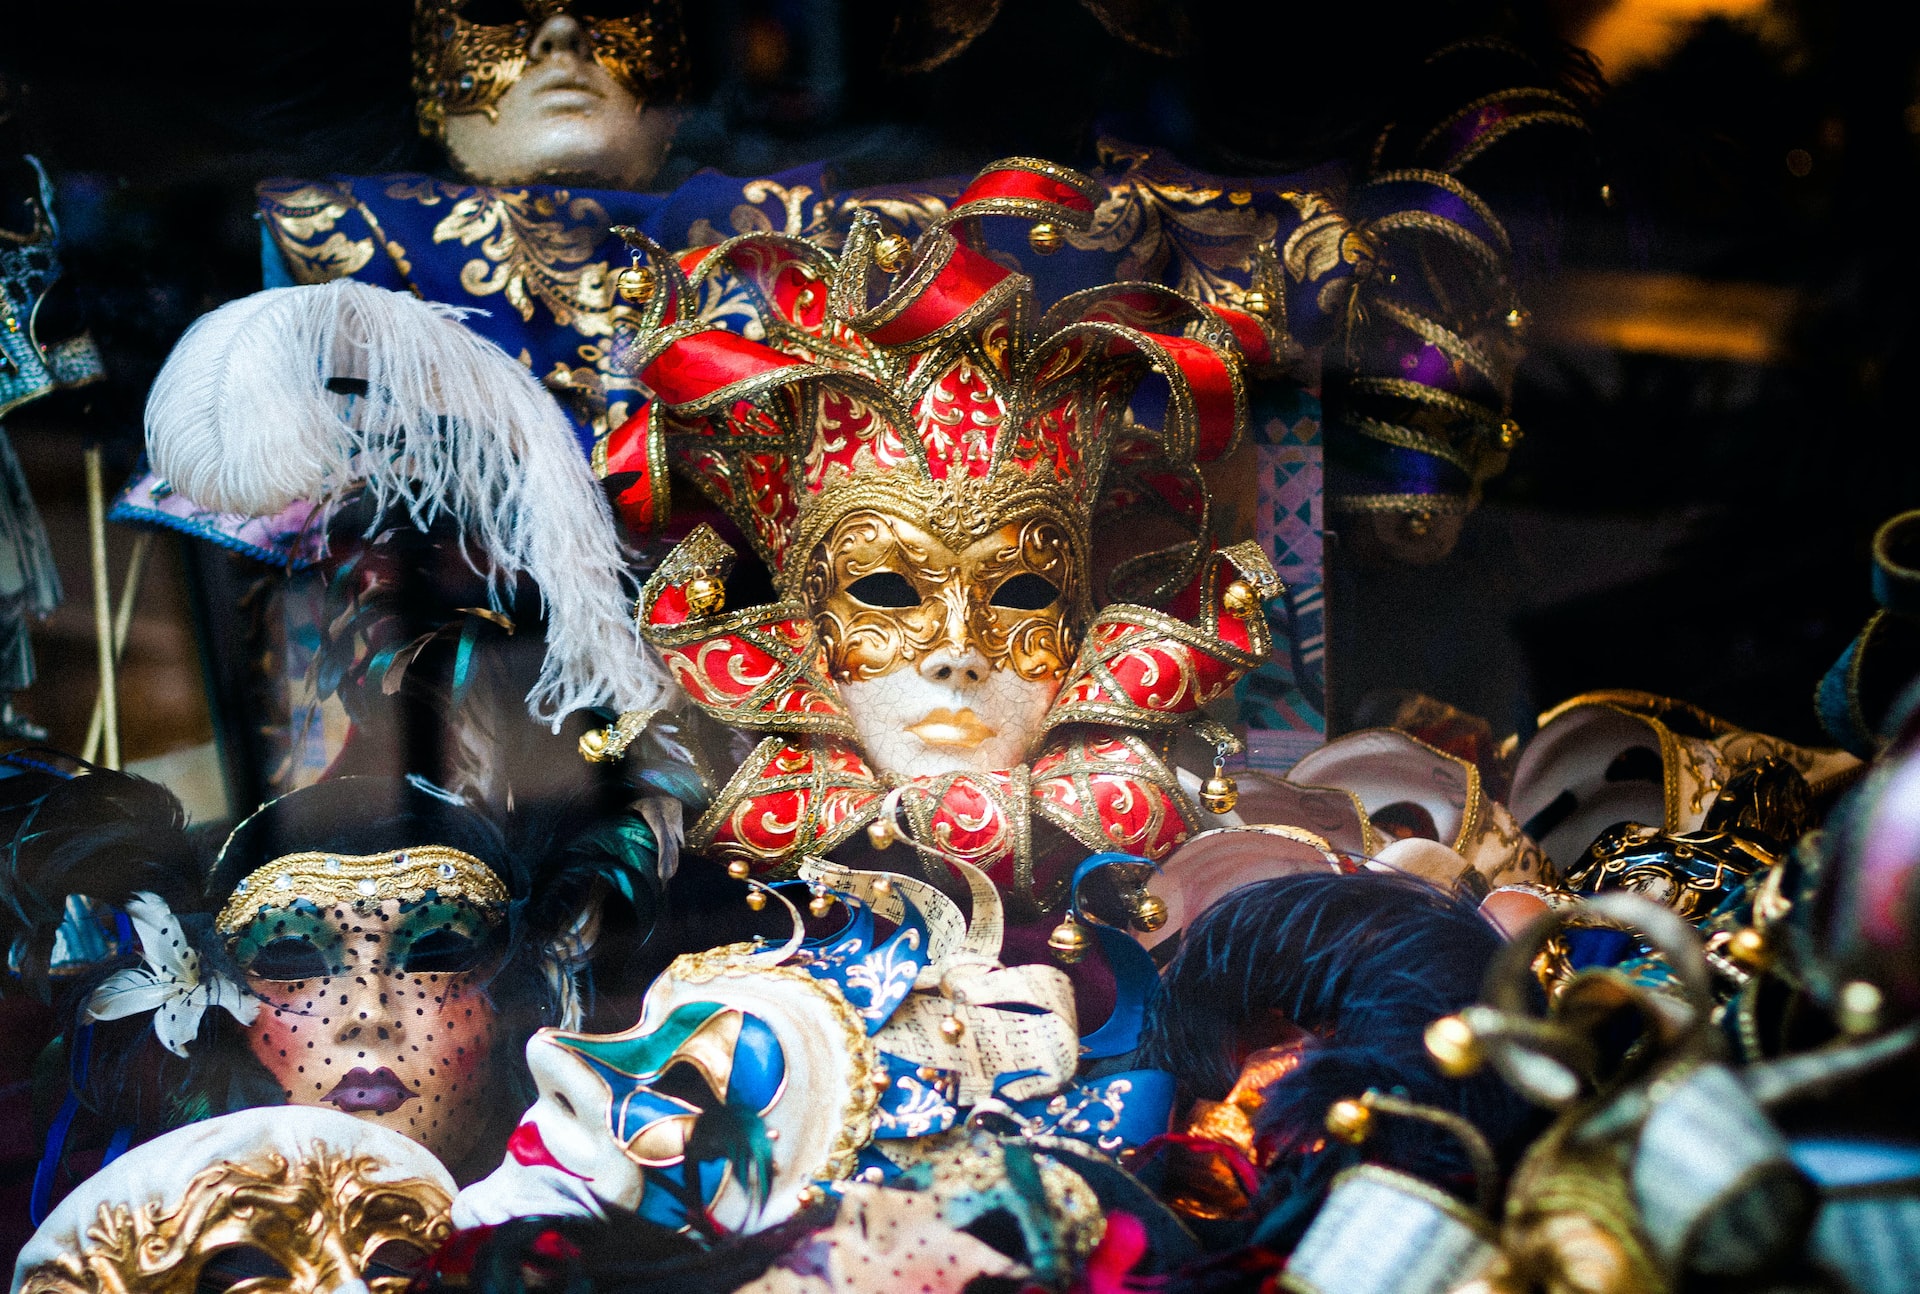 Carnival masks in a storefront window.